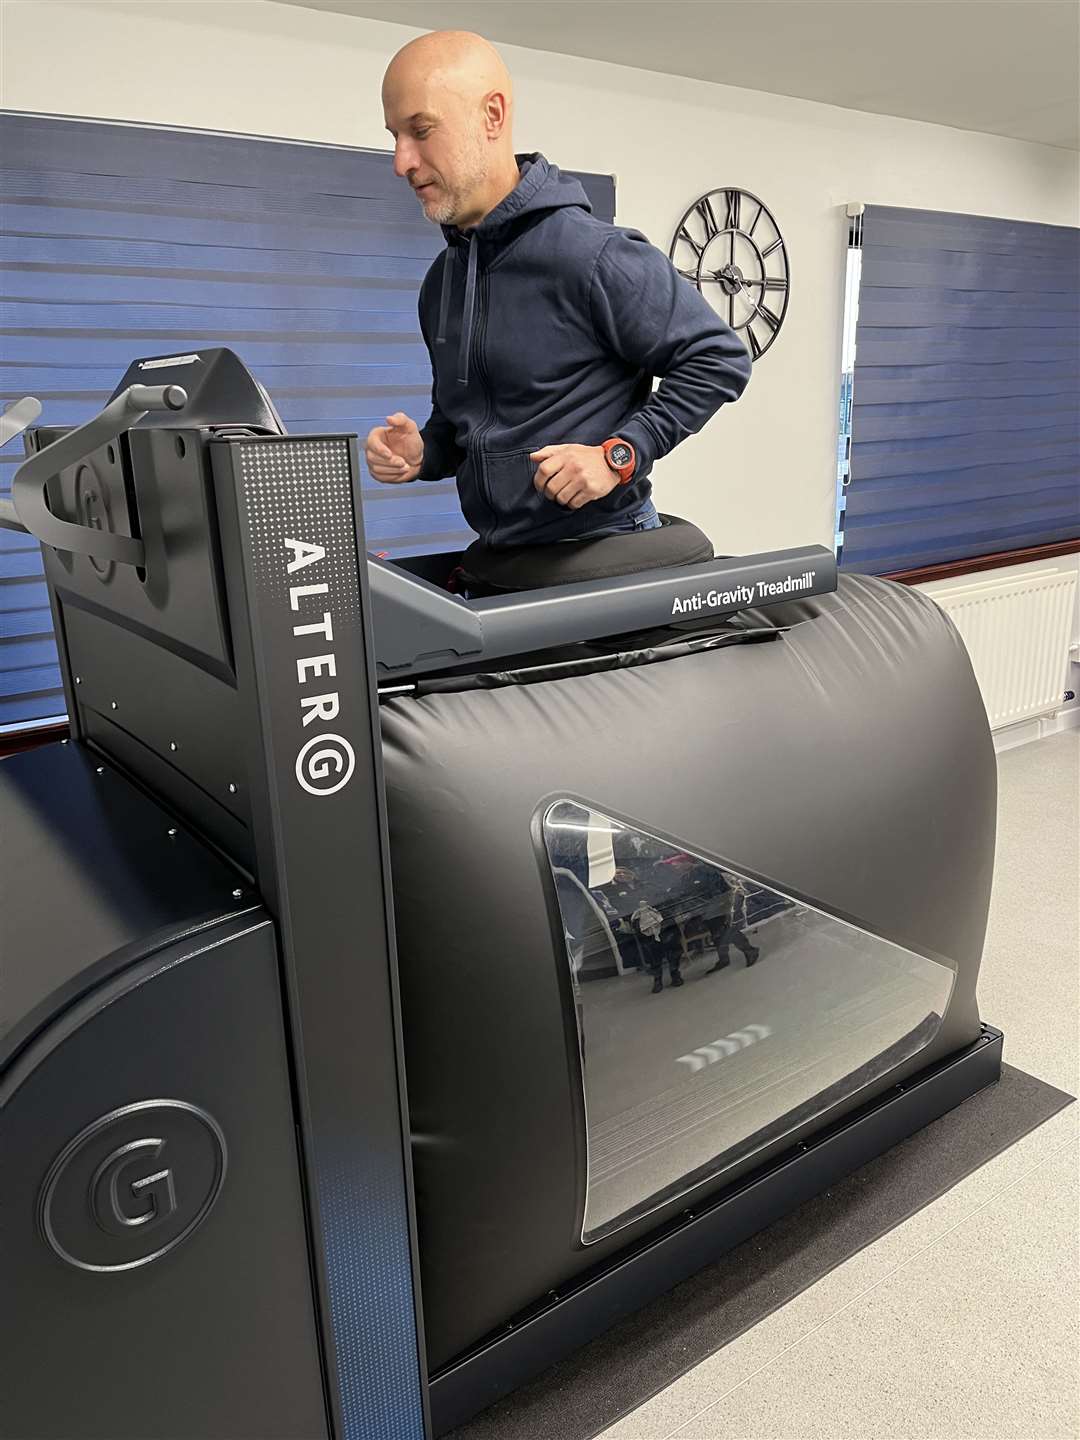 The anti-gravity treadmill at The Oxygen Works in Inverness. Dave Powney from Move 4ward in Elgin.